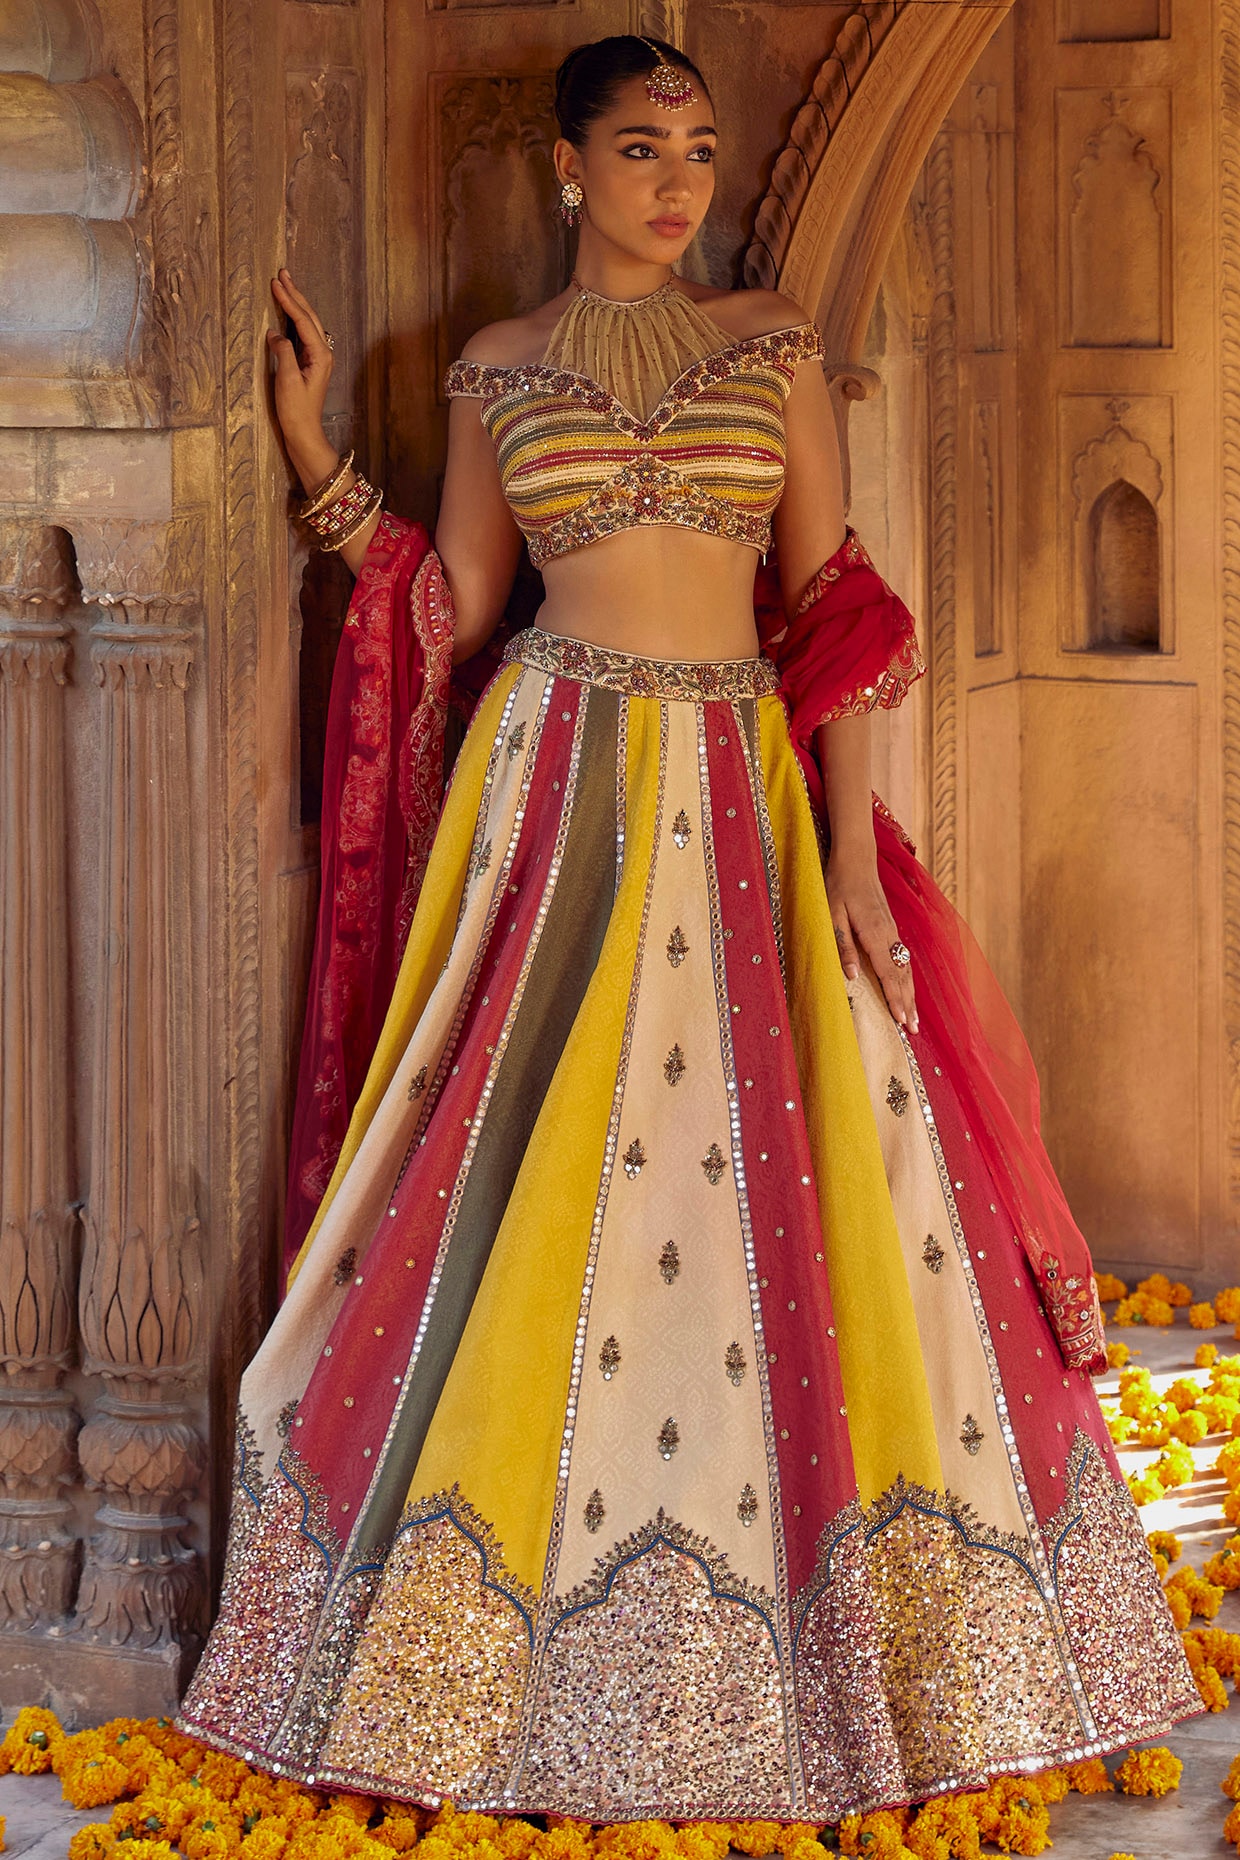 Buy The Jaipur Bazar Baby Girl's Cotton Pink Lehenga Choli For 6-7 year old  girl at Amazon.in